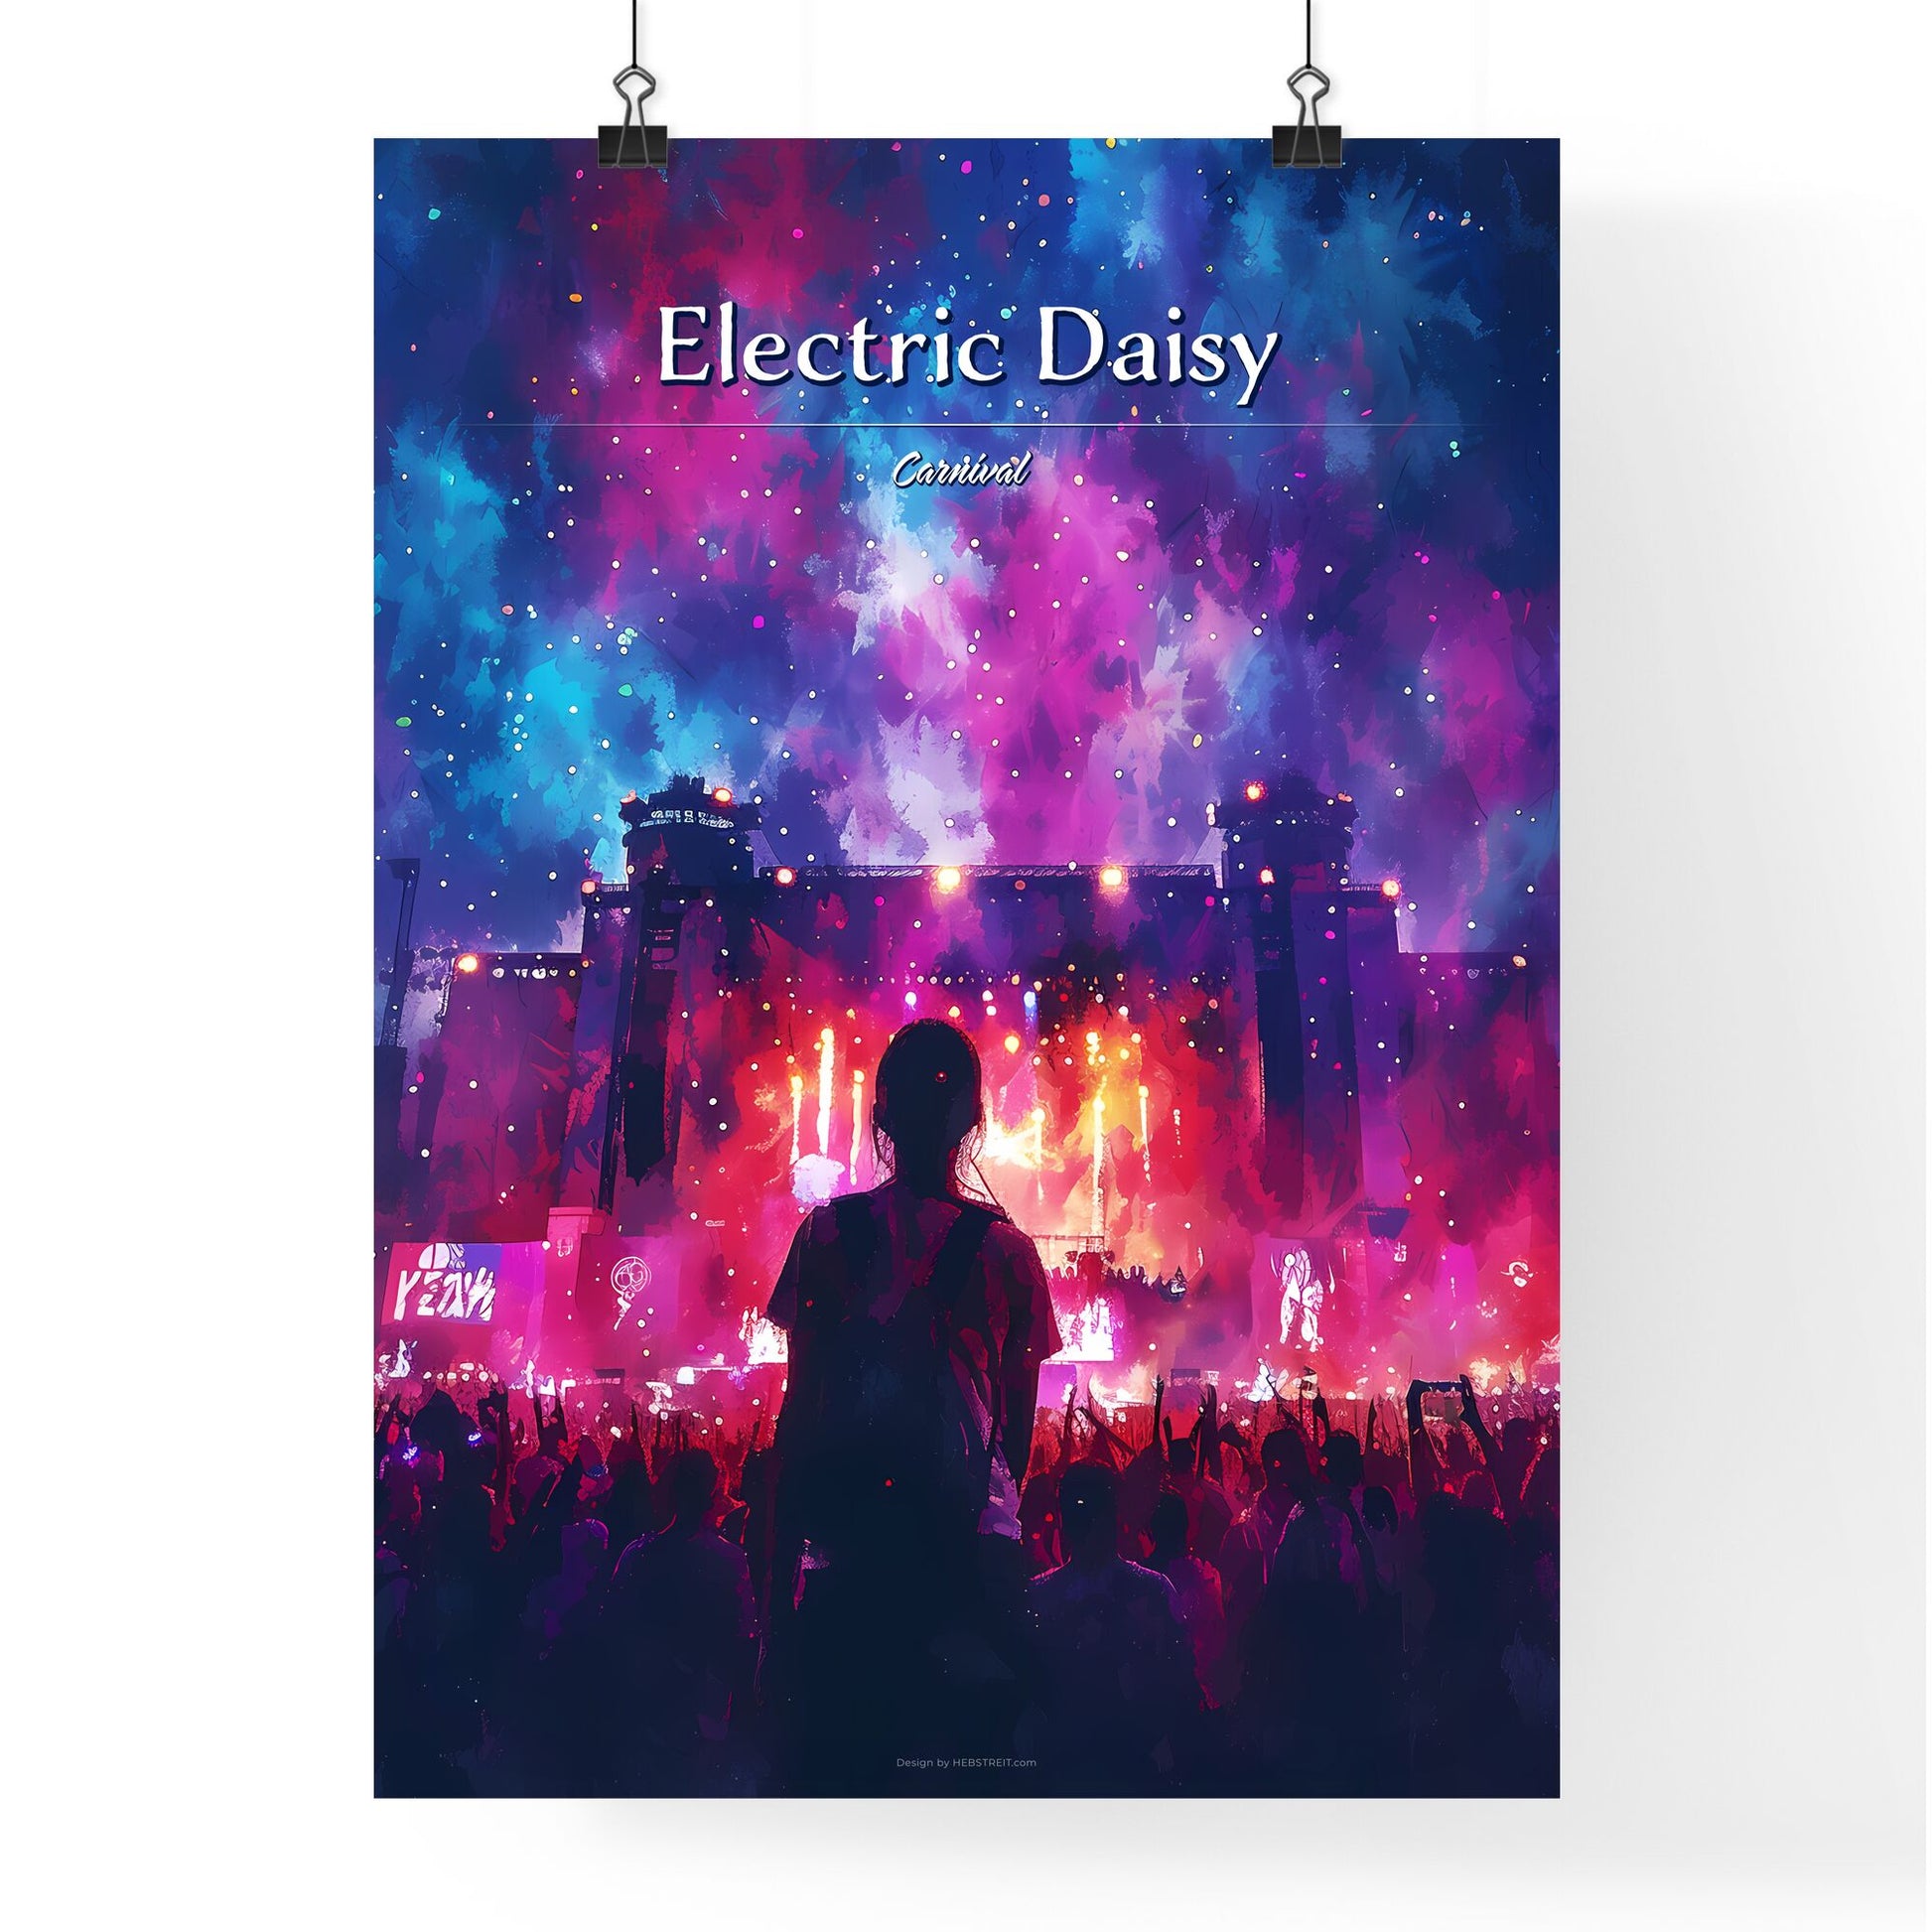 Electric Daisy Carnival (EDC) - Art print of a crowd of people watching a concert Default Title